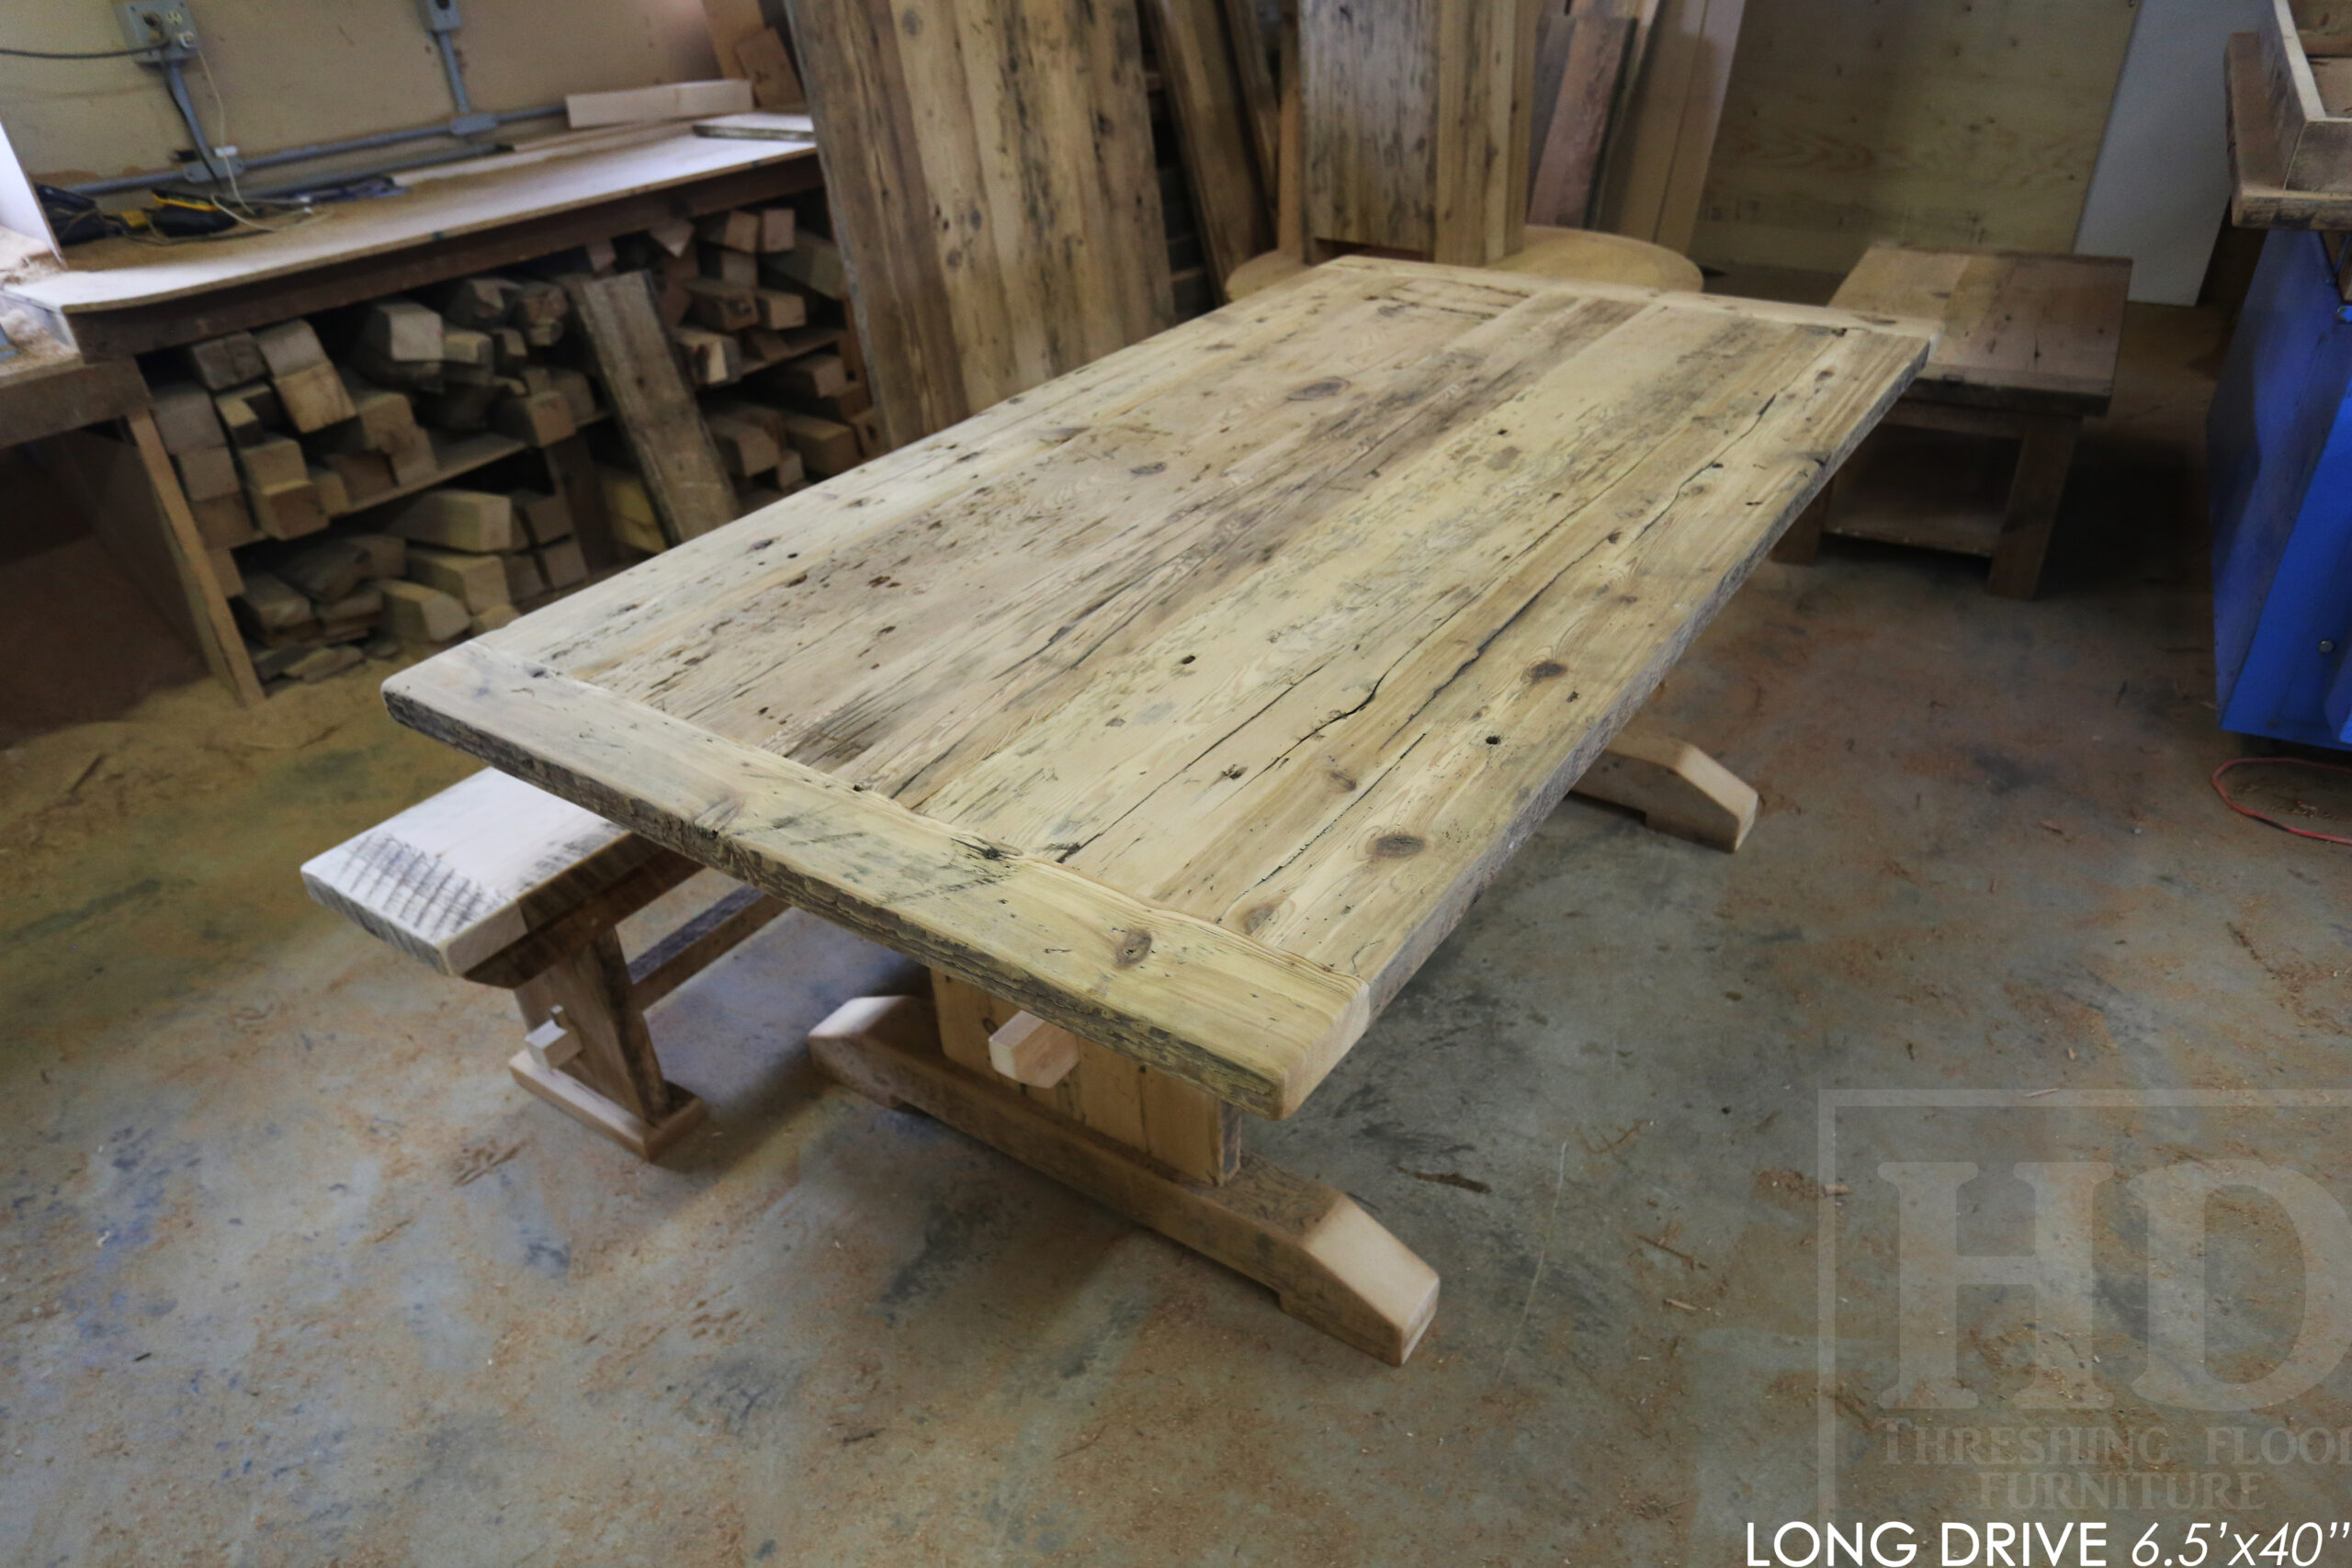 6.5' Reclaimed Wood Table for a Burlington home - 42" wide - Trestle Base - Hemlock Threshing Floor Construction / Medium Sanding out of Original Patina - Original edges & distressing maintained - Premium epoxy + satin polyurethane finish - 6.5' [matching] Reclaimed wood bench - 5 Non-arm Ladder Back Chairs - Wormy Maple - Black with sandthroughs frame / seat stained colour of table / www.table.ca